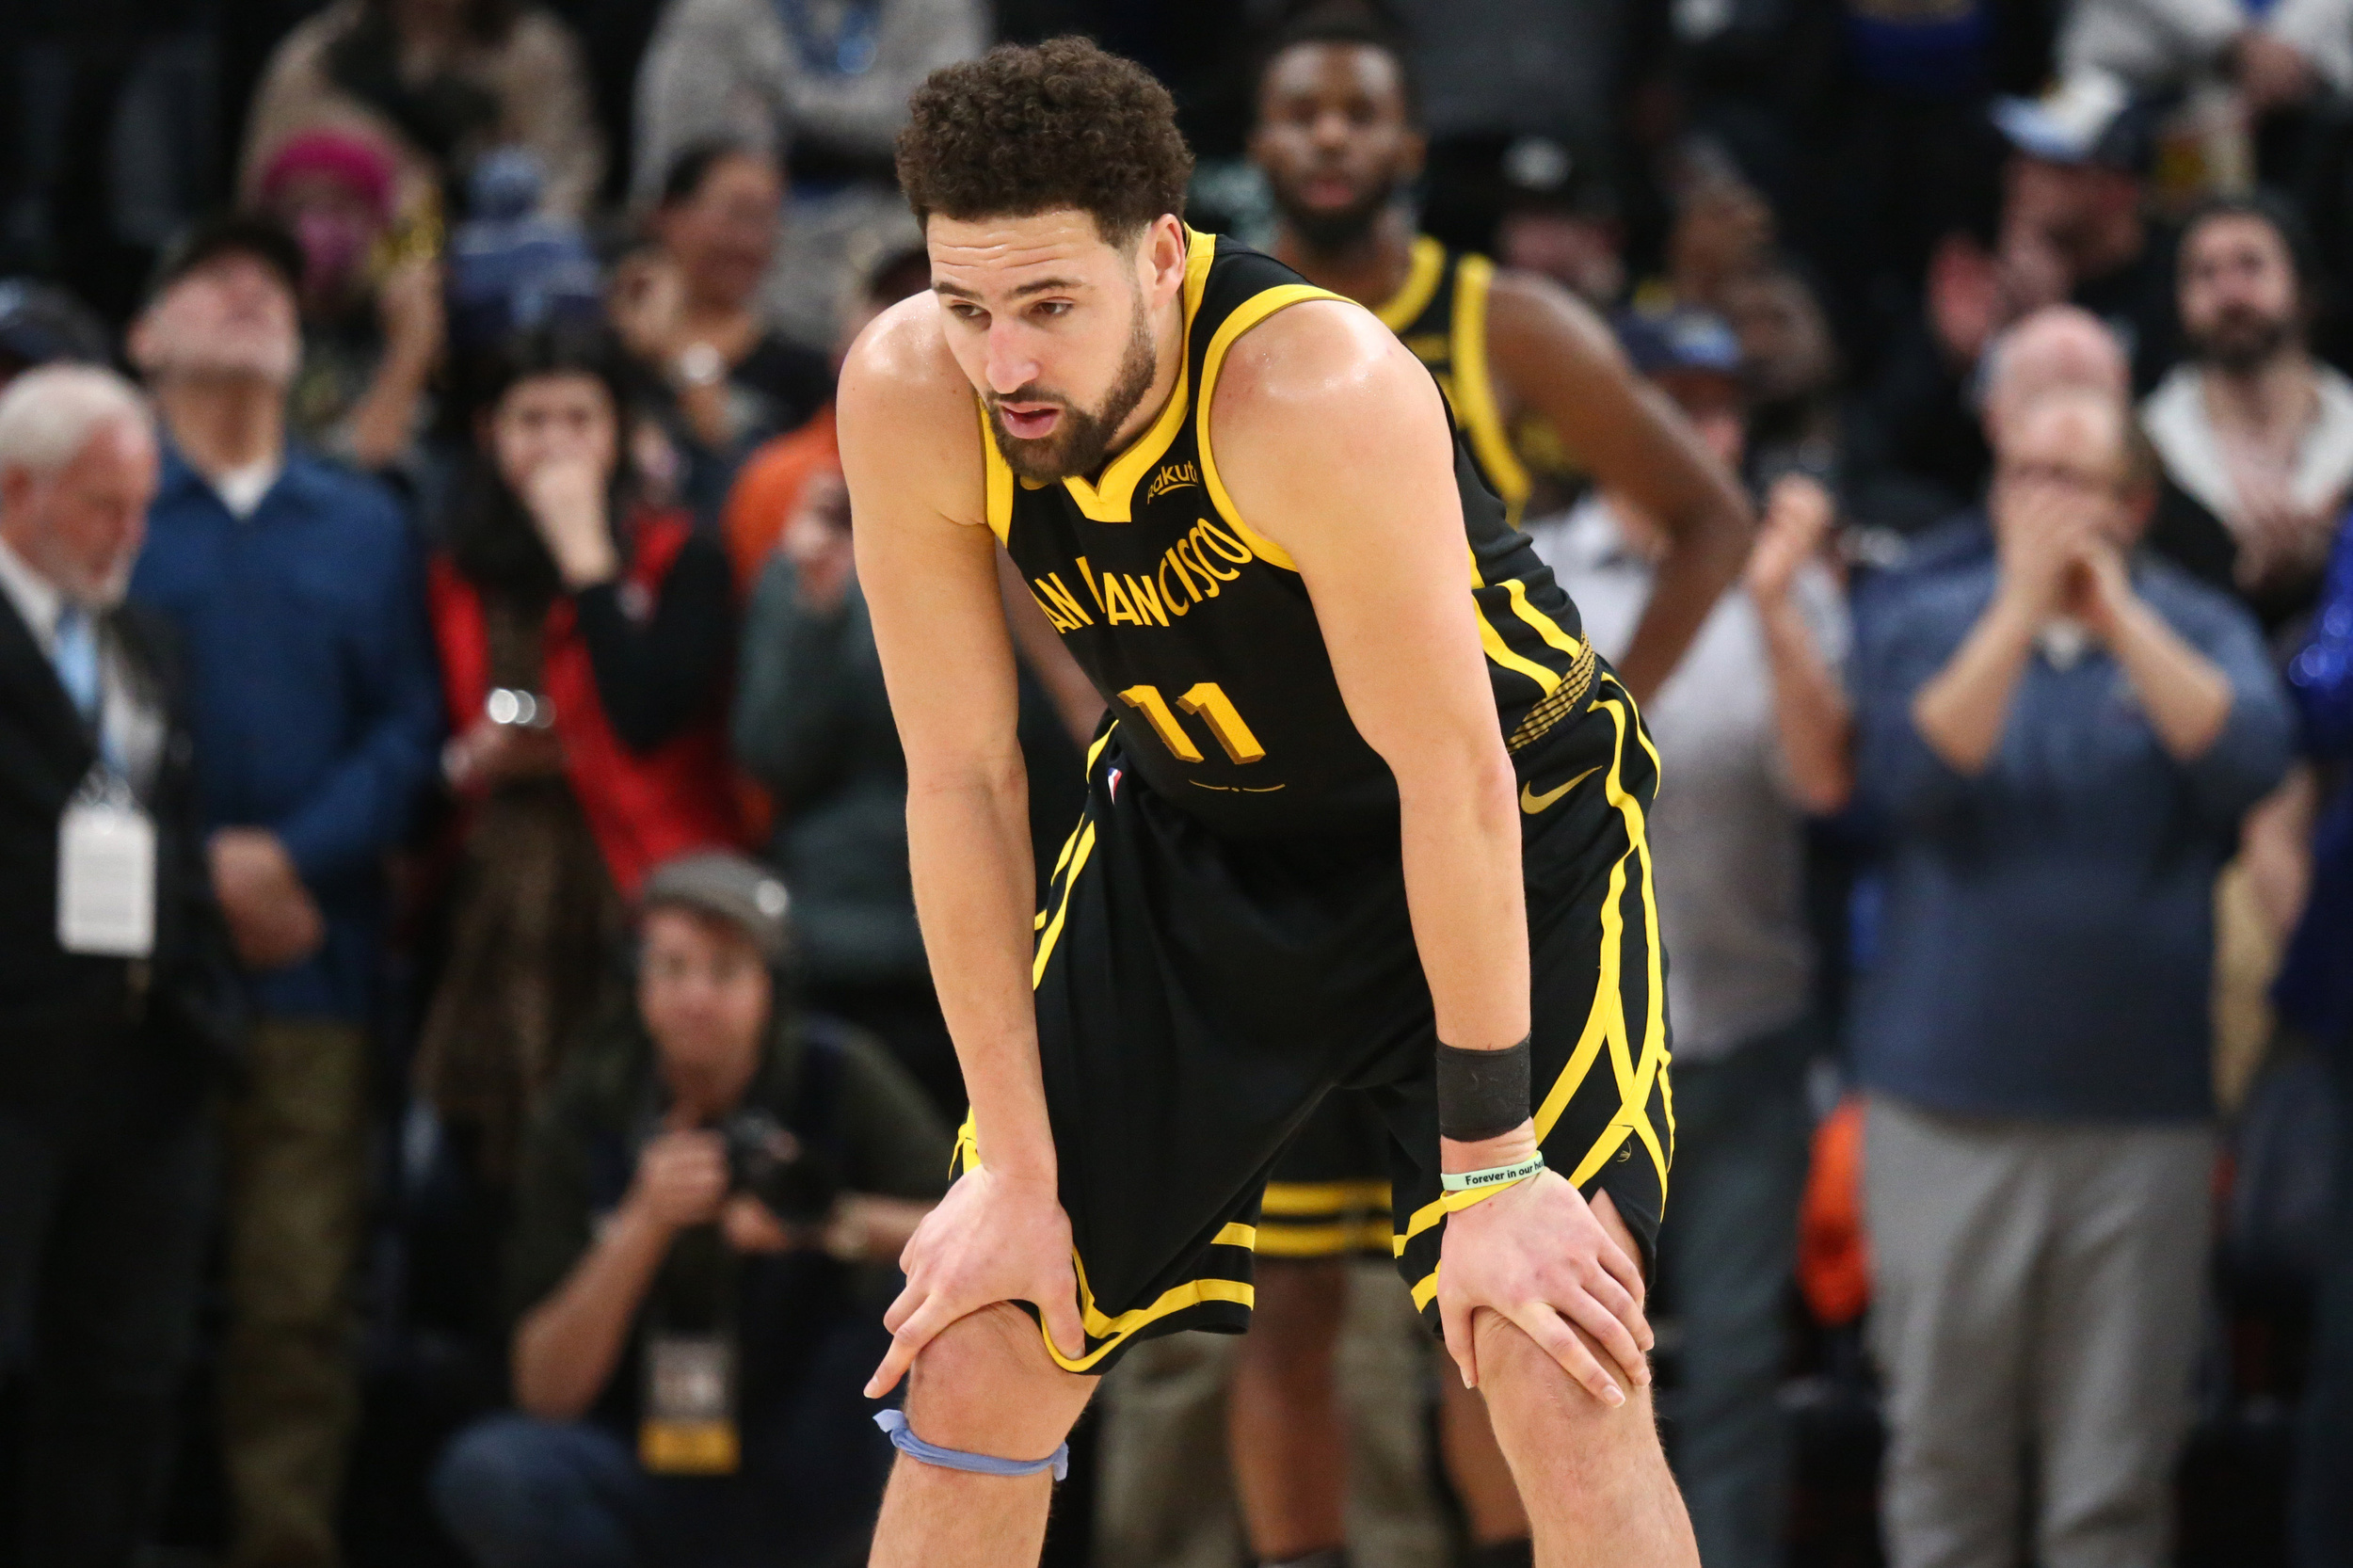 warriors insider provides candid opinion on klay thompson's future